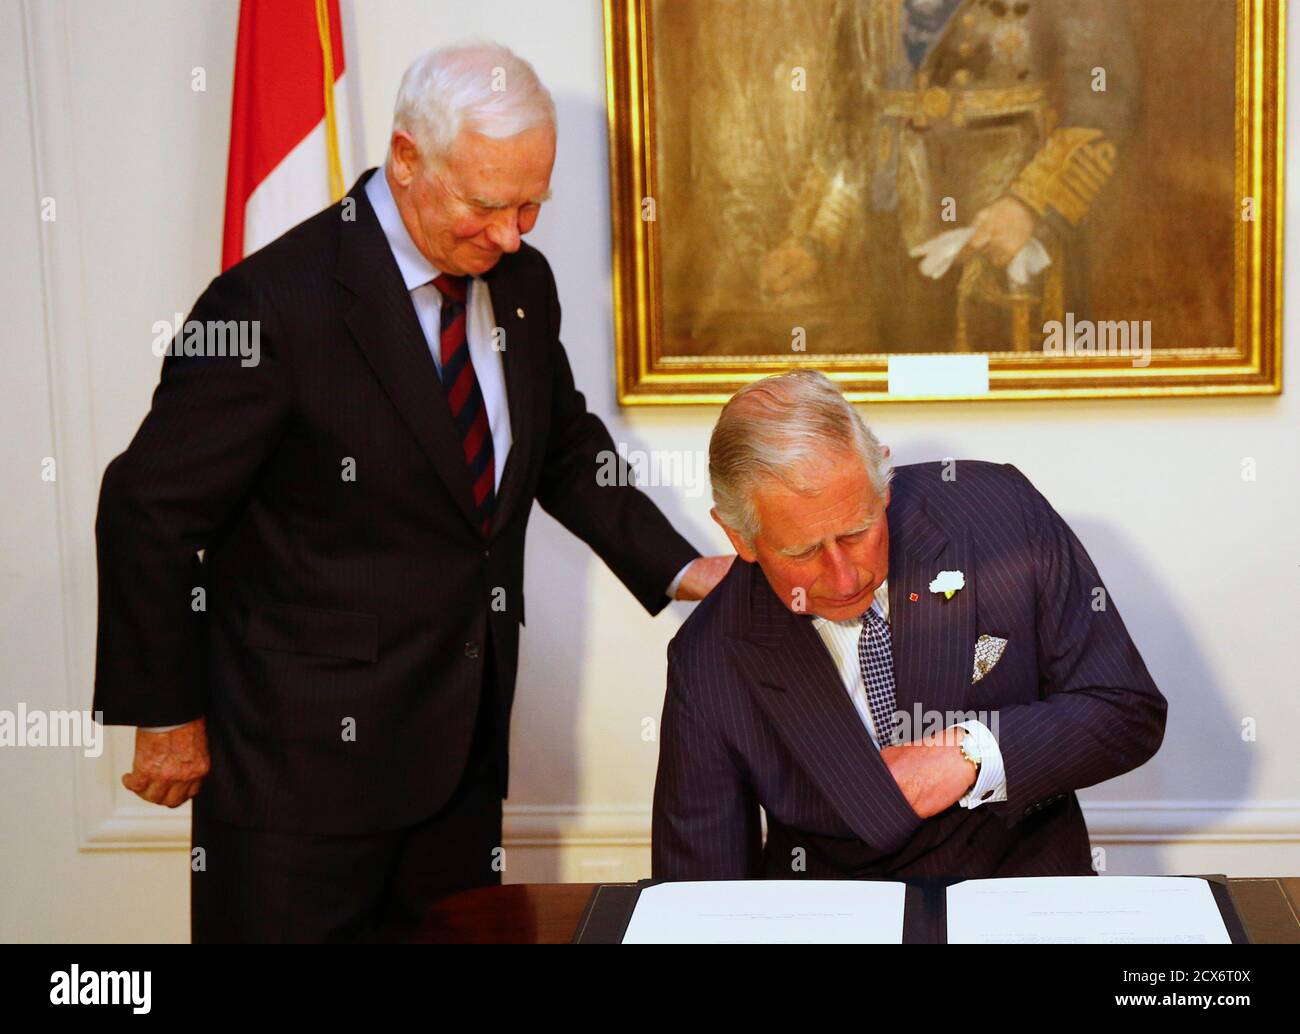 Britain's Prince Charles (R) sits down to sign a document to be sworn in as a member of the Canadian Privy Council beside Governor General of Canada David Johnson in Halifax, Nova Scotia May 18, 2014. The royal couple are on a four-day visit to Canada that begins in Halifax and includes stops in Pictou, Nova Scotia, the Prince Edward Island towns of Charlottetown, Bonshaw and Cornwall and concludes in Winnipeg. REUTERS/Mark Blinch (CANADA - Tags: ROYALS SOCIETY ENTERTAINMENT) Stock Photo